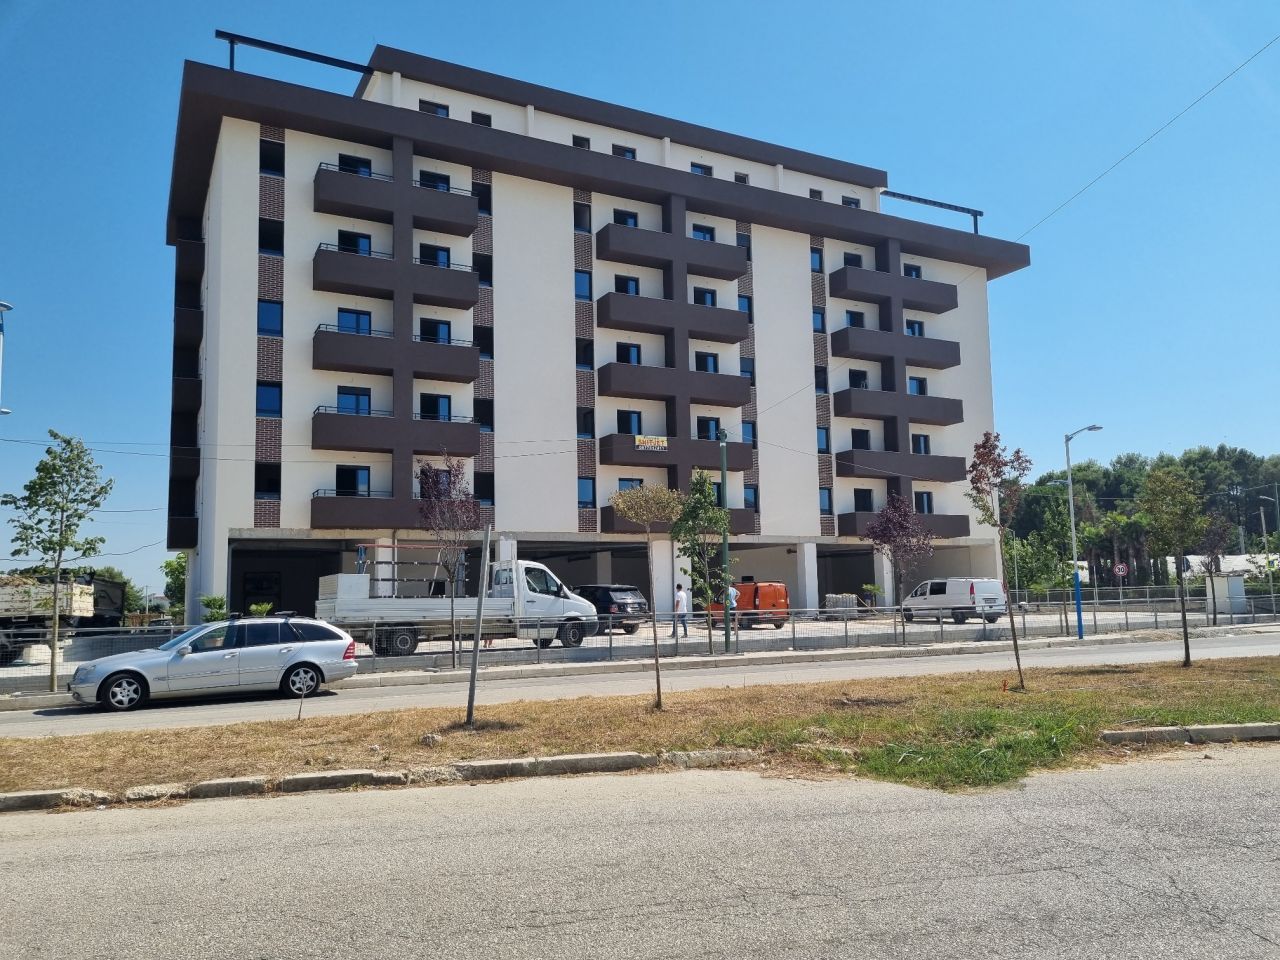 Apartment For Sale In Mali Robit Golem Durres Albania, Located In A Quiet Area, Near The Beach